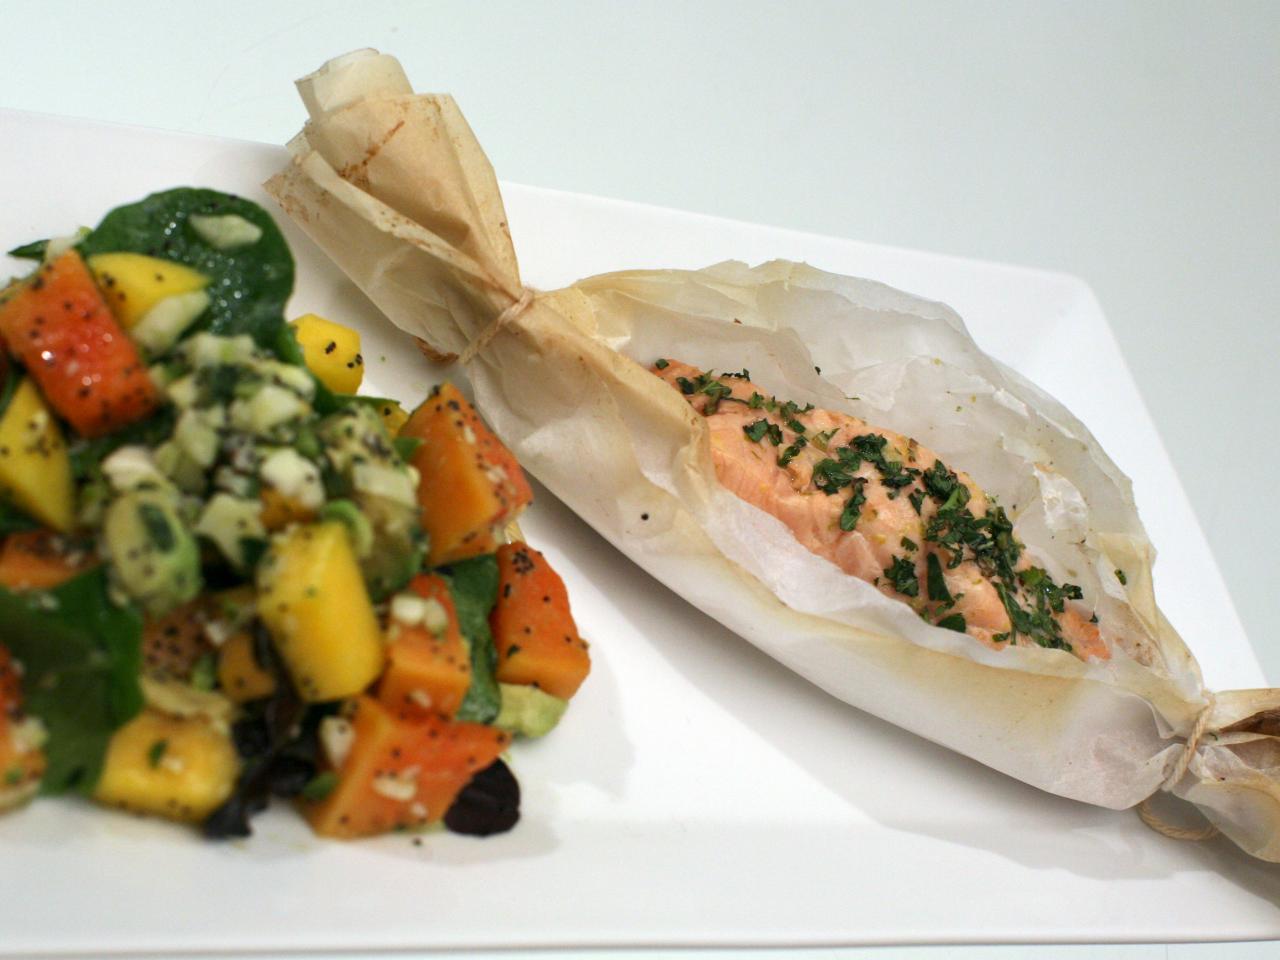 SALMON EN PAPILLOTE: SALMON & VEGETABLES BAKED IN PARCHMENT PAPER